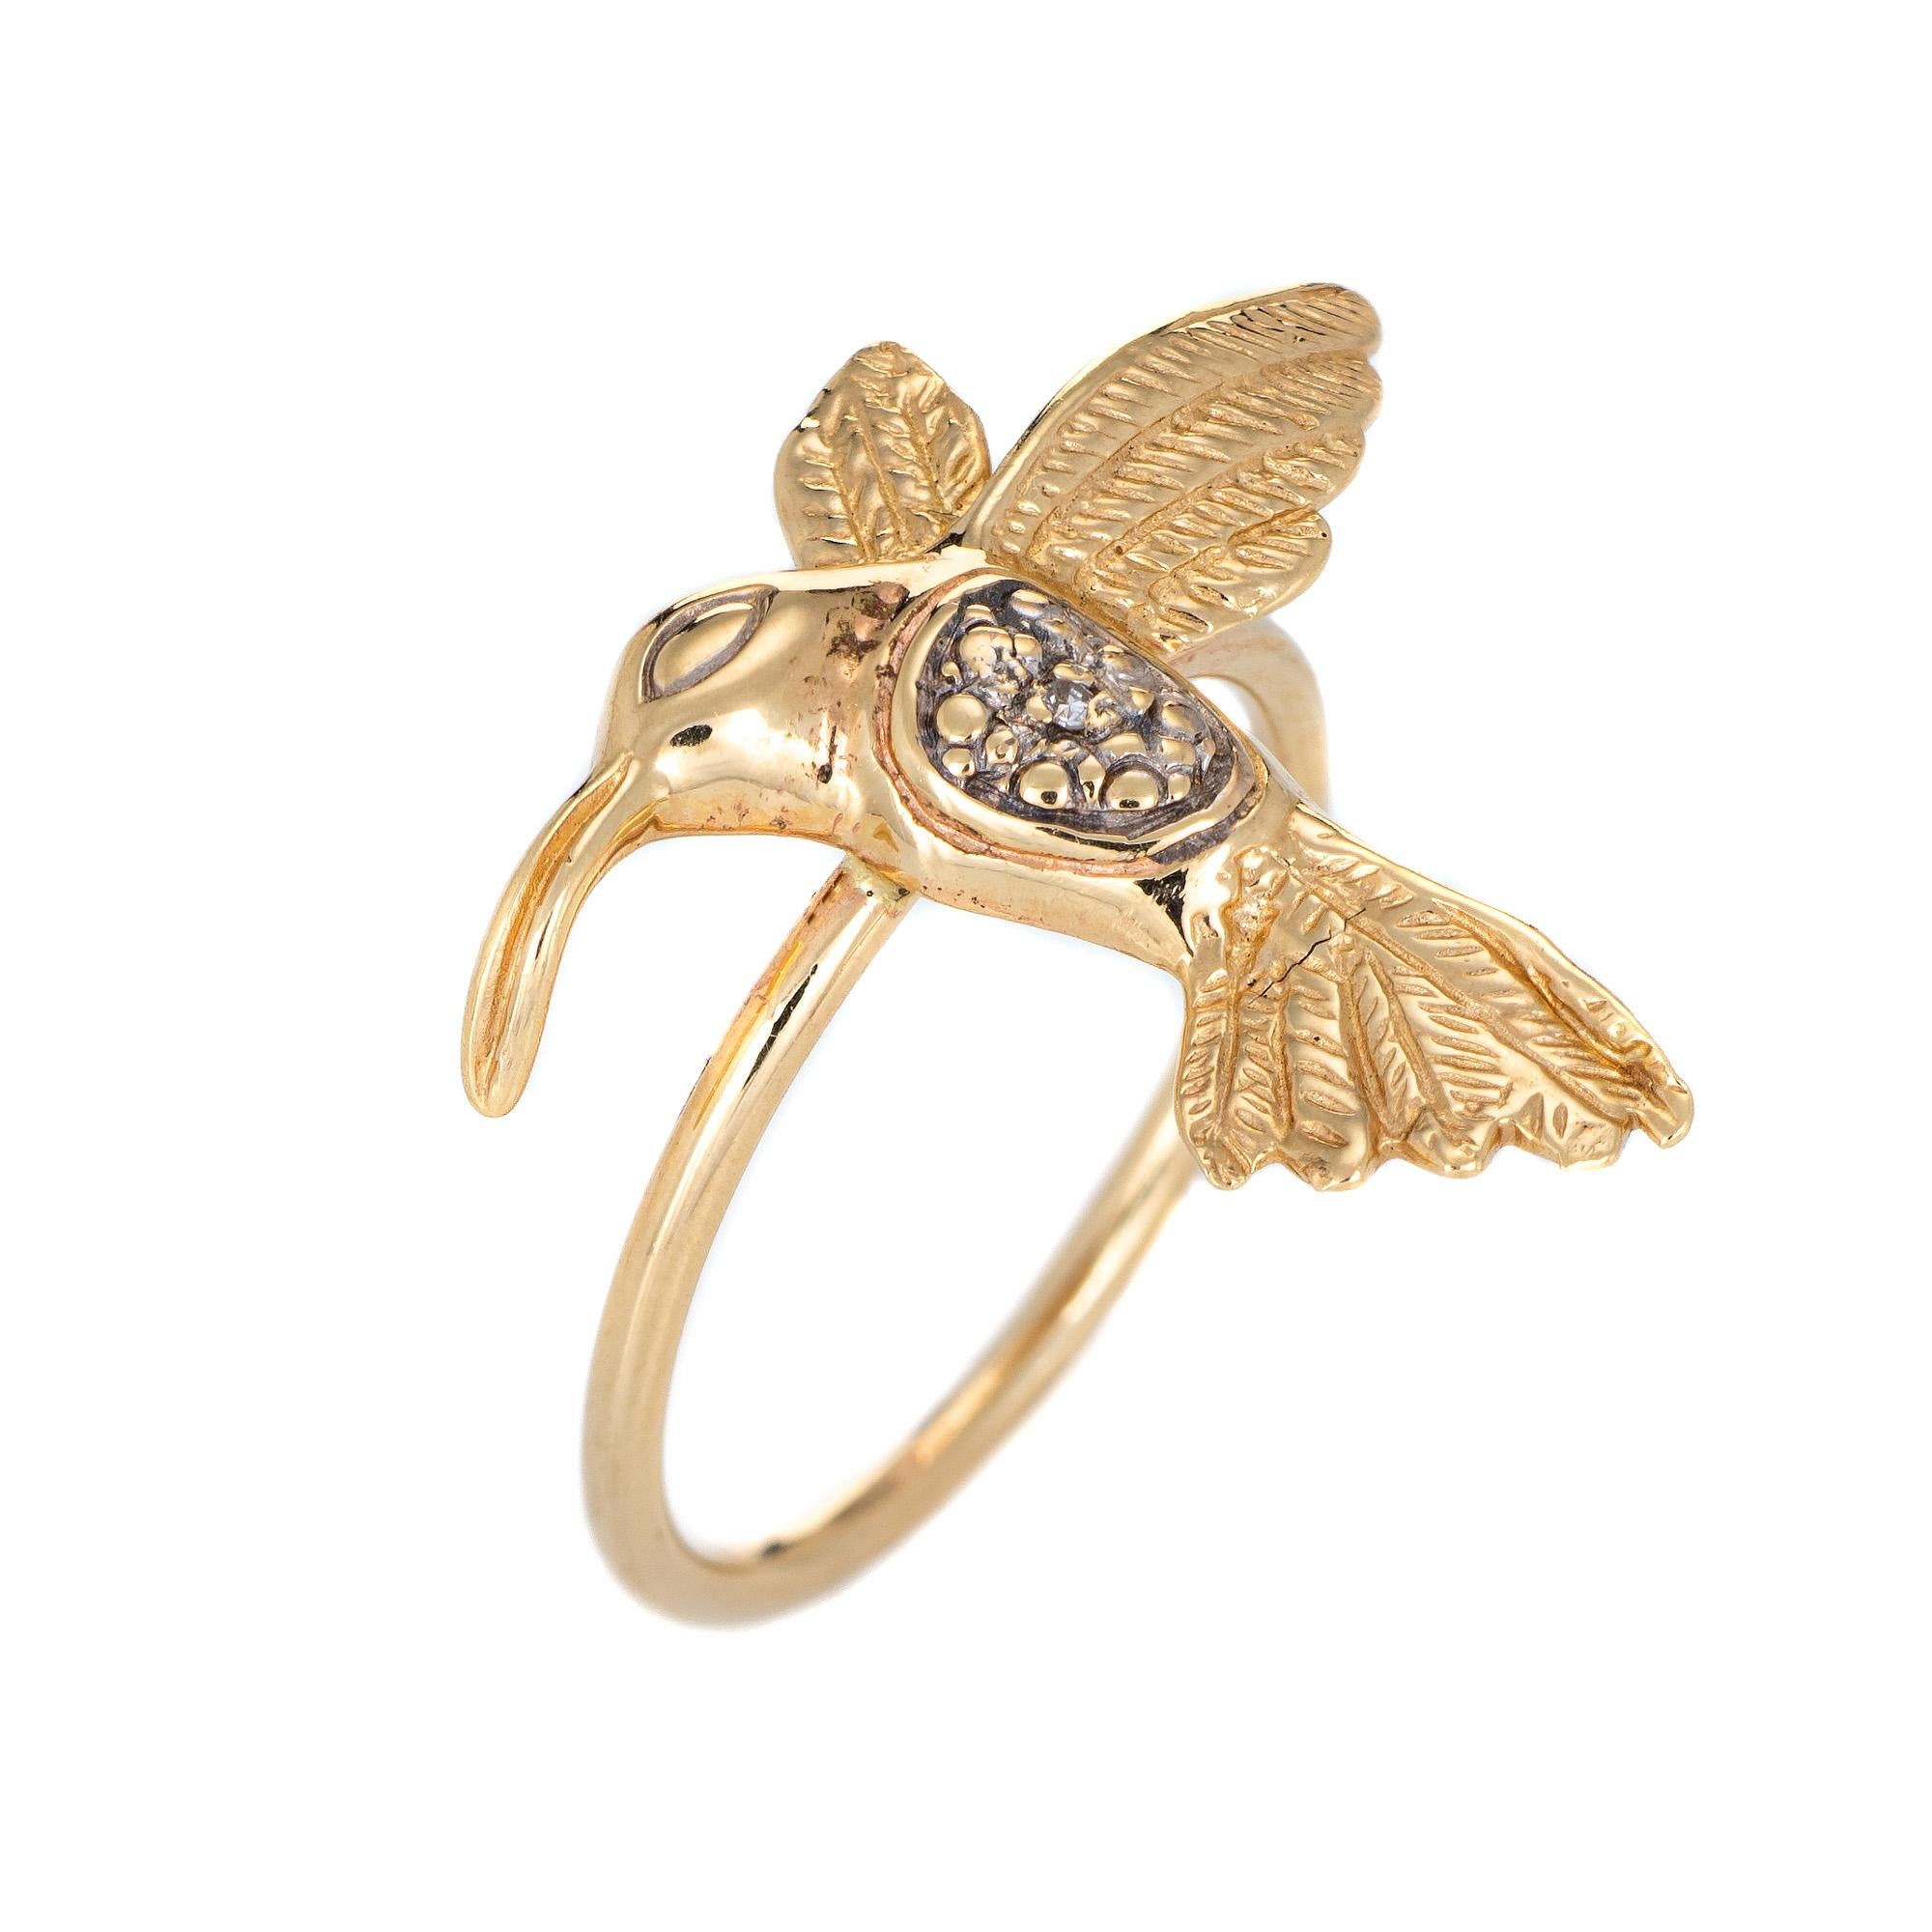 Originally a vintage stick pin the hummingbird ring is crafted in 14 karat yellow gold.

The ring is mounted with the original stick pin. Our jeweler rounded the stick pin into a slim band for the finger. The charming ring features lifelike detail